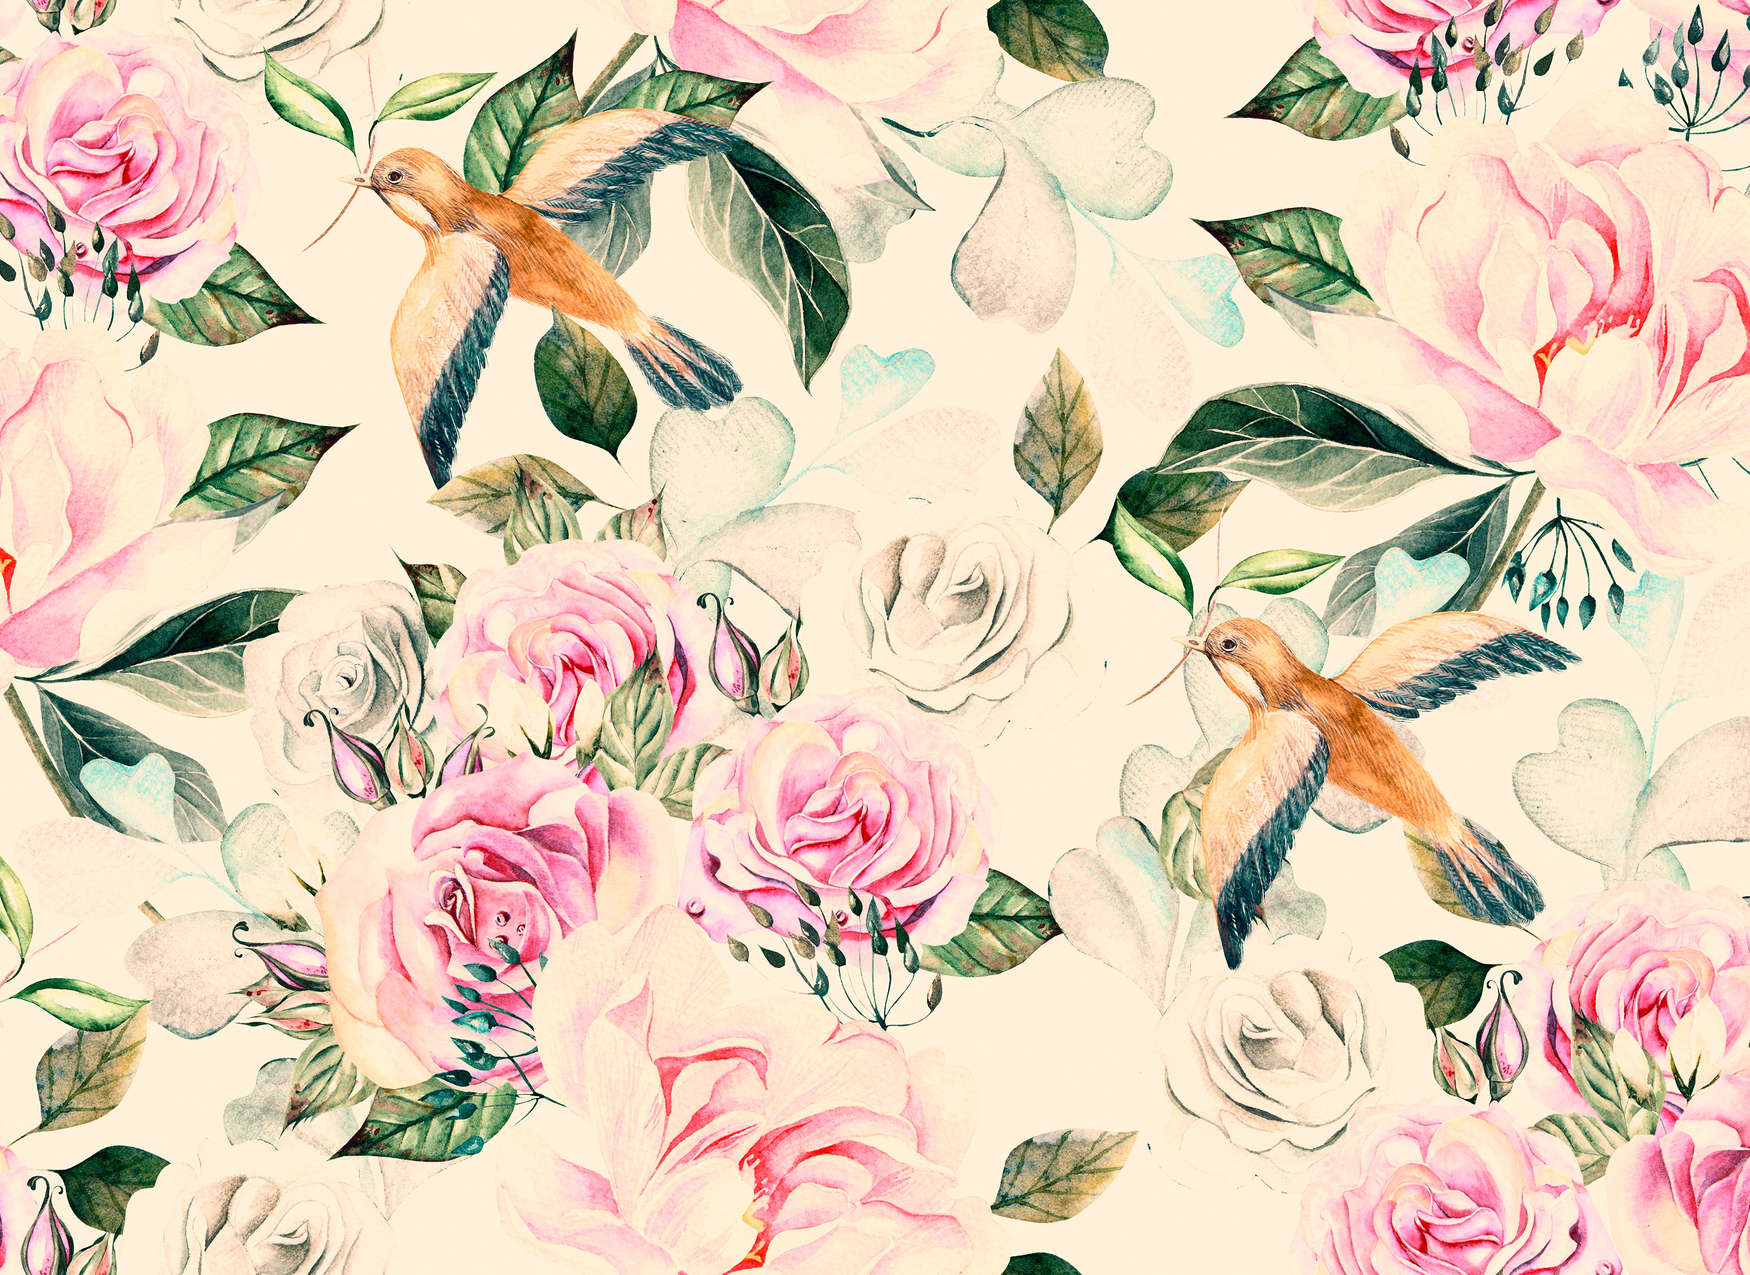             Vintage Style Playful Flowers and Birds - Cream, Pink, Green
        